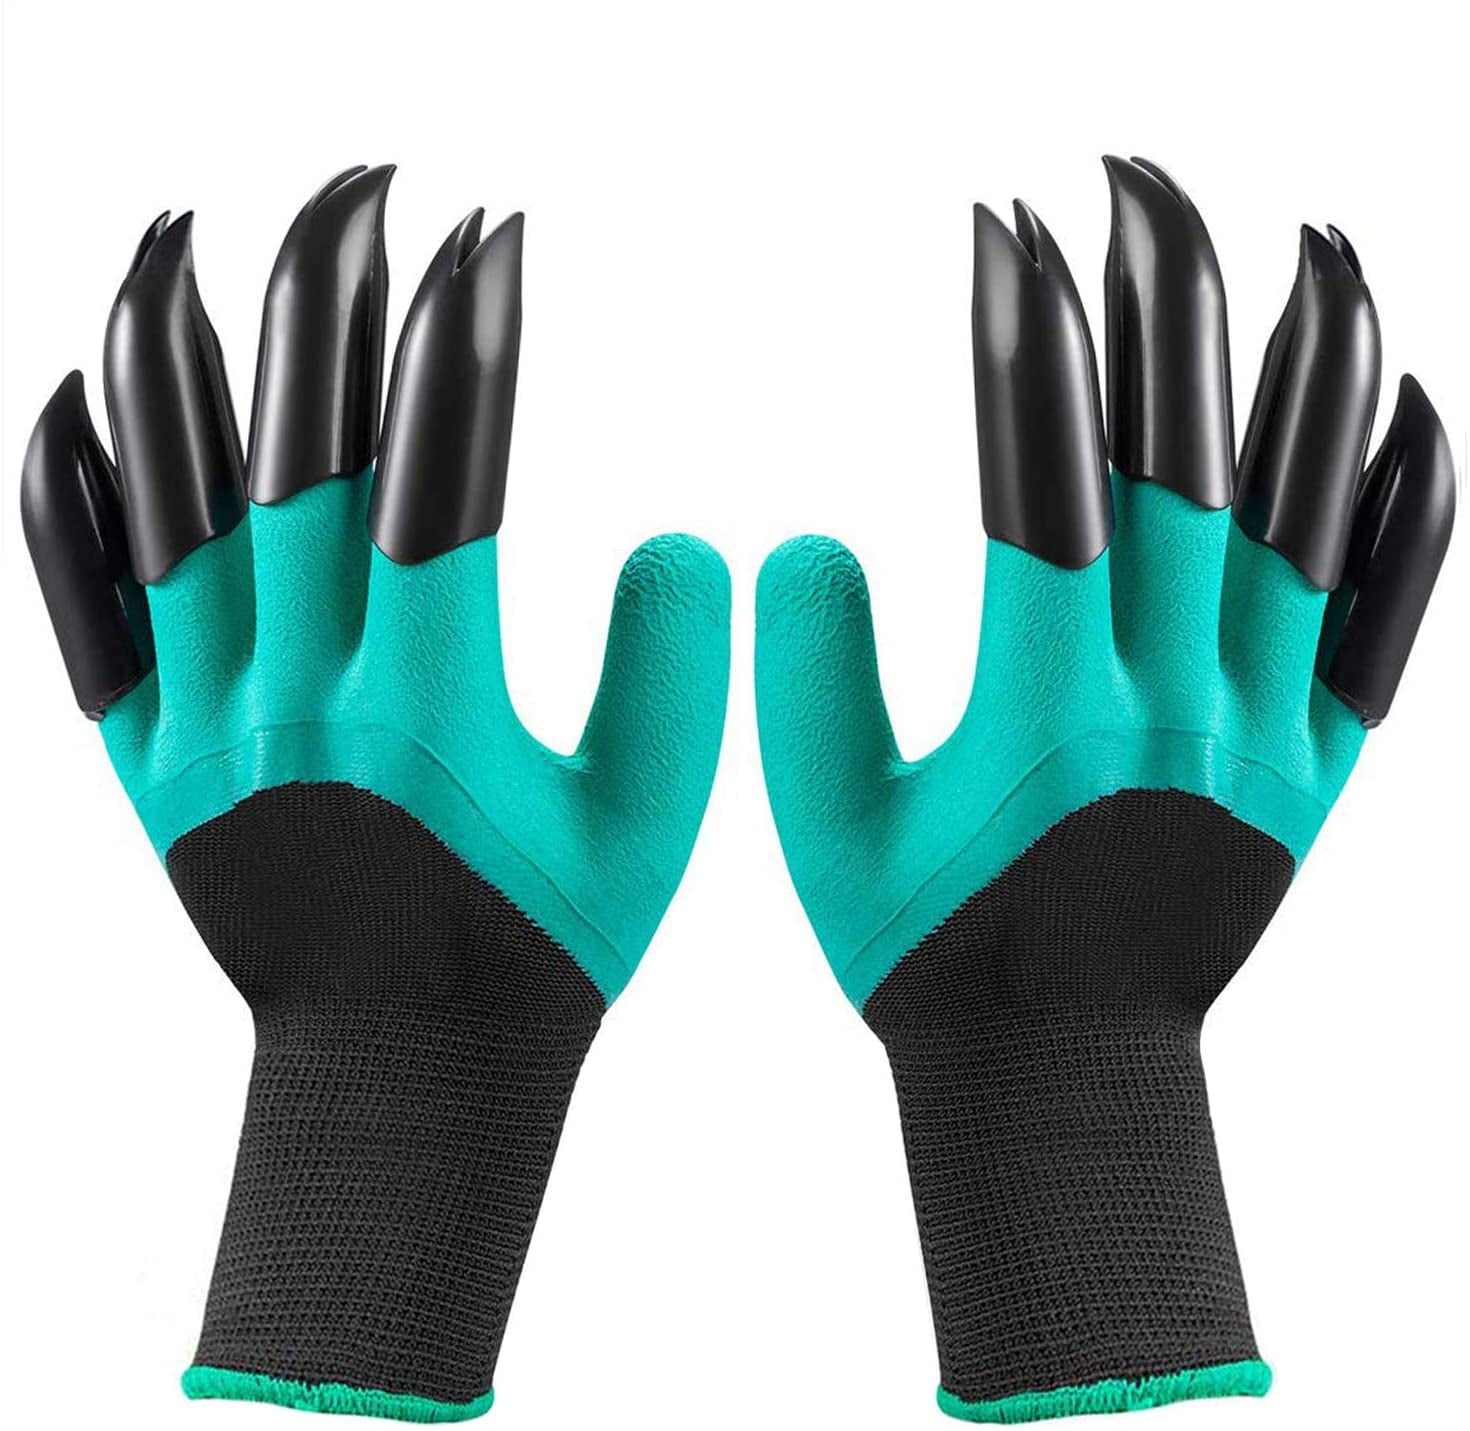 Gardening Gloves with Claws For Raking Digging Planting Waterproof And Washable 